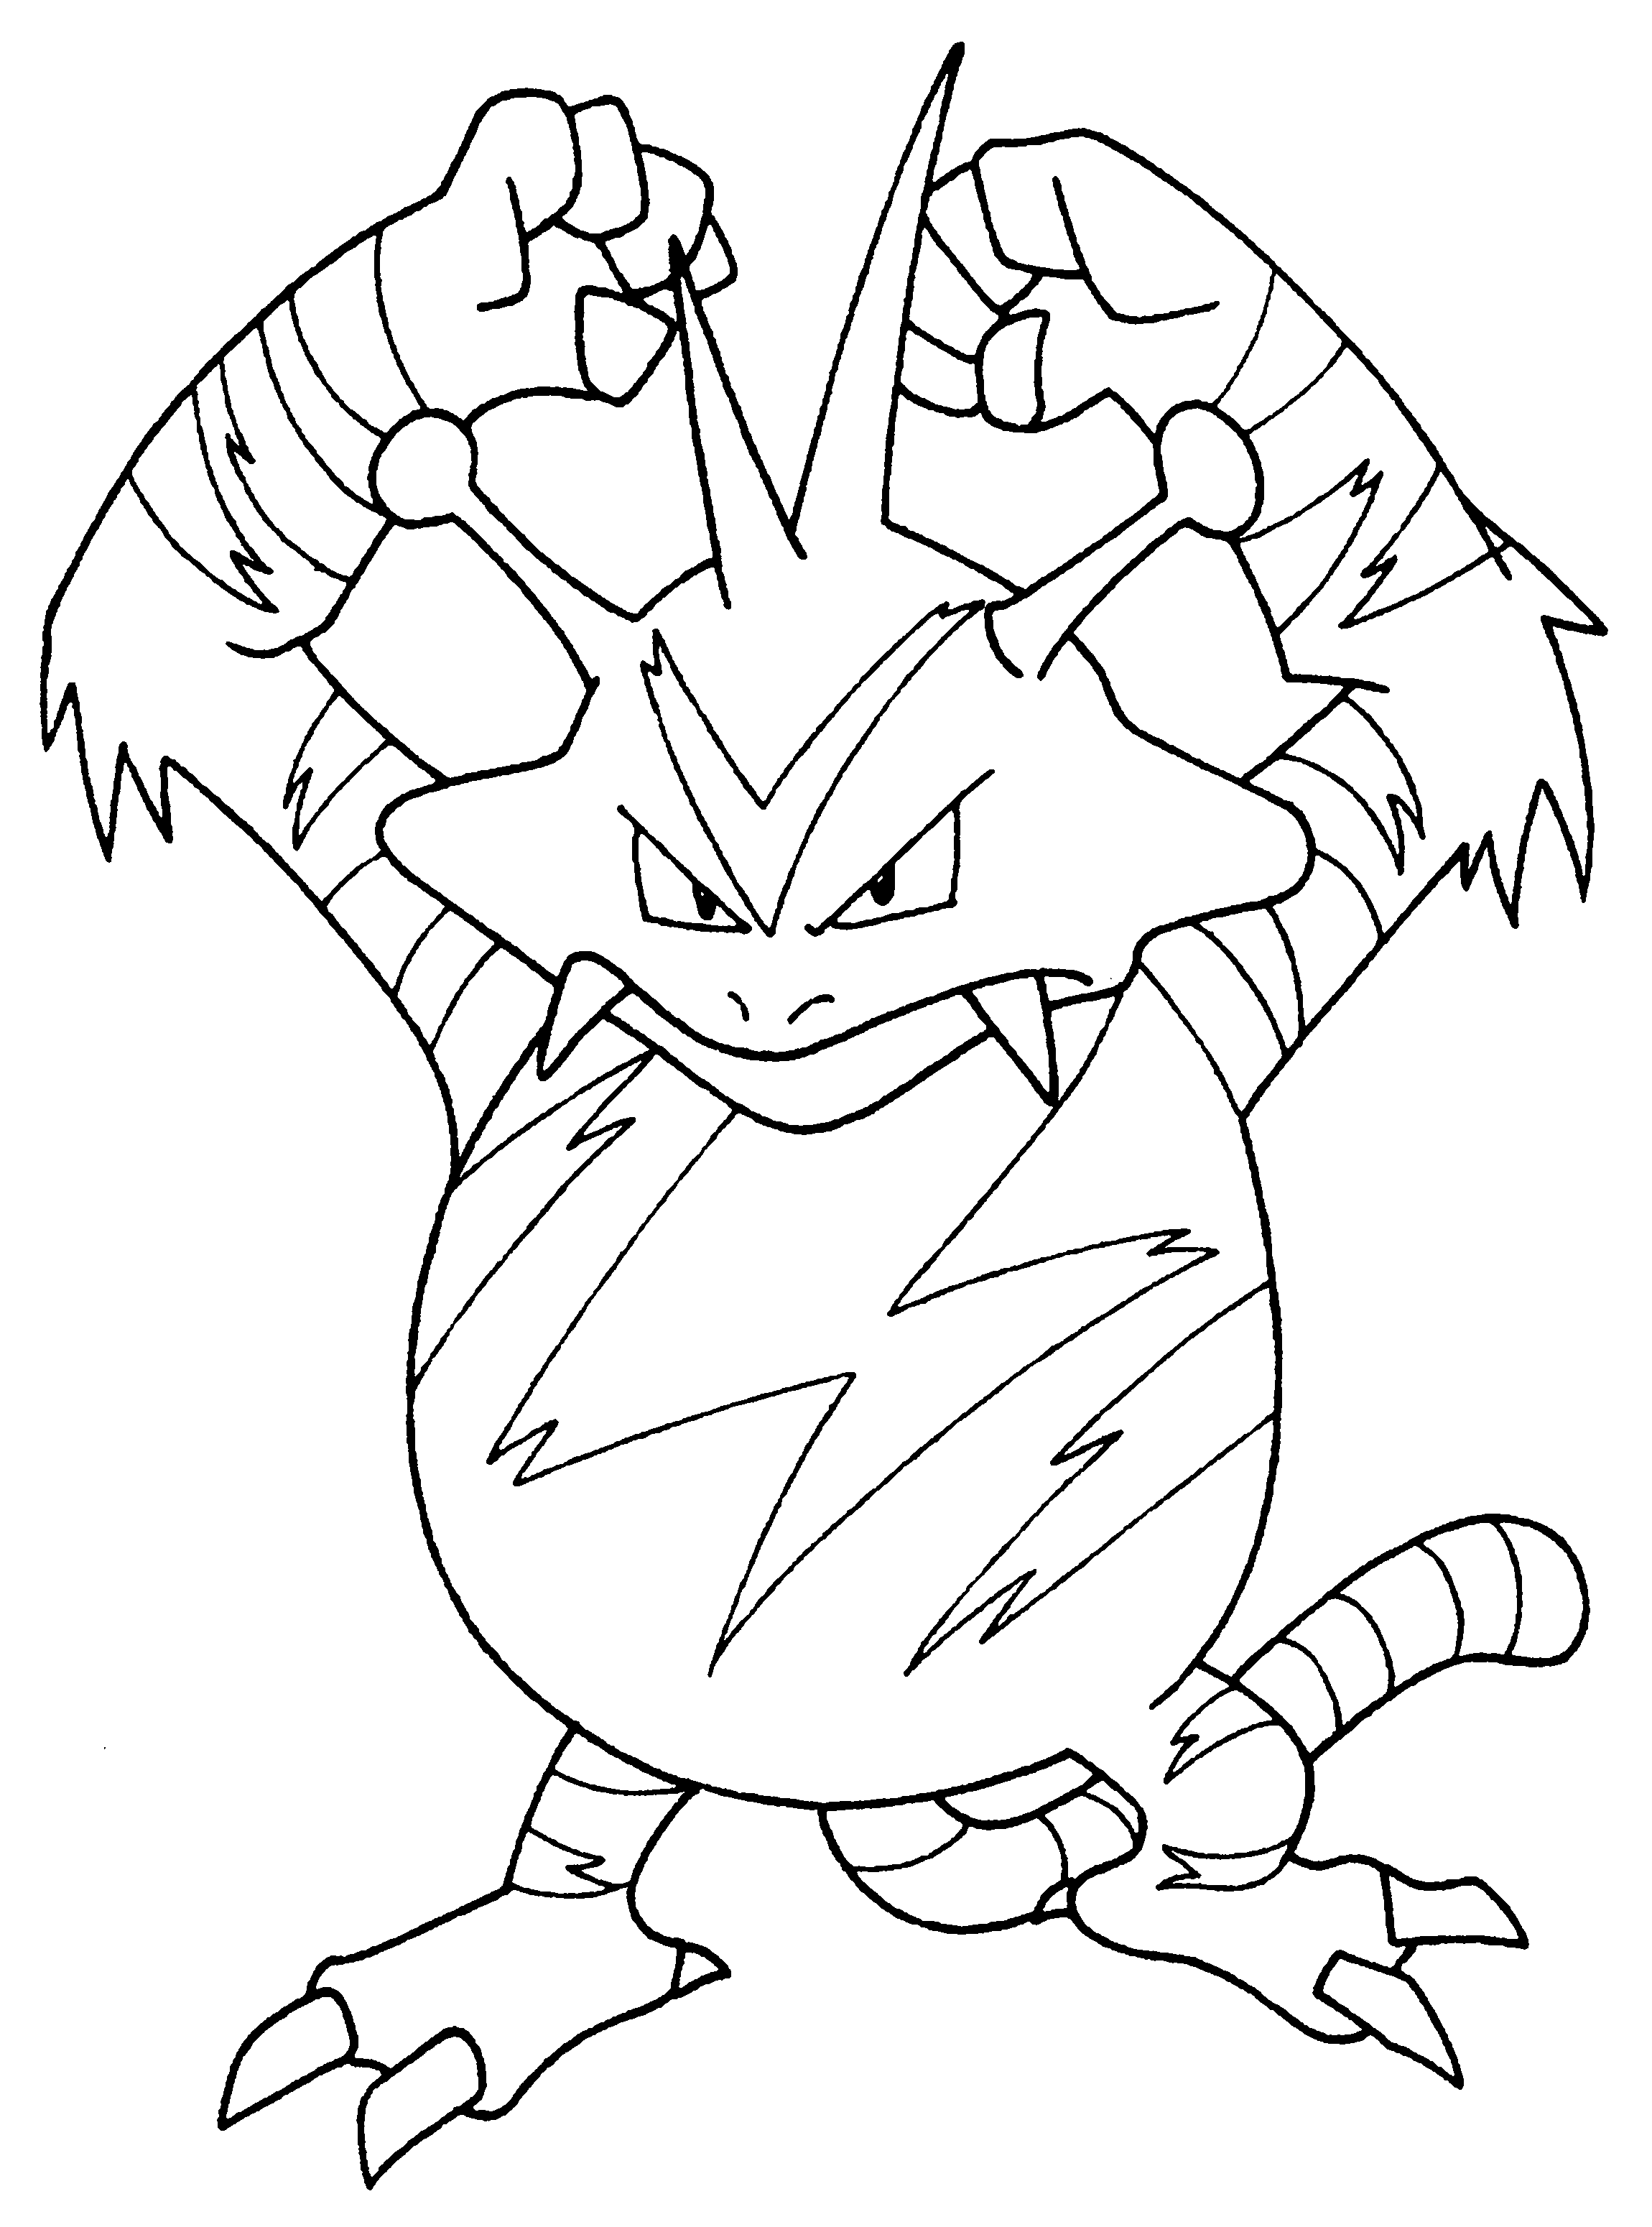 Pokemon Coloring Pages Join your favorite Pokemon on an